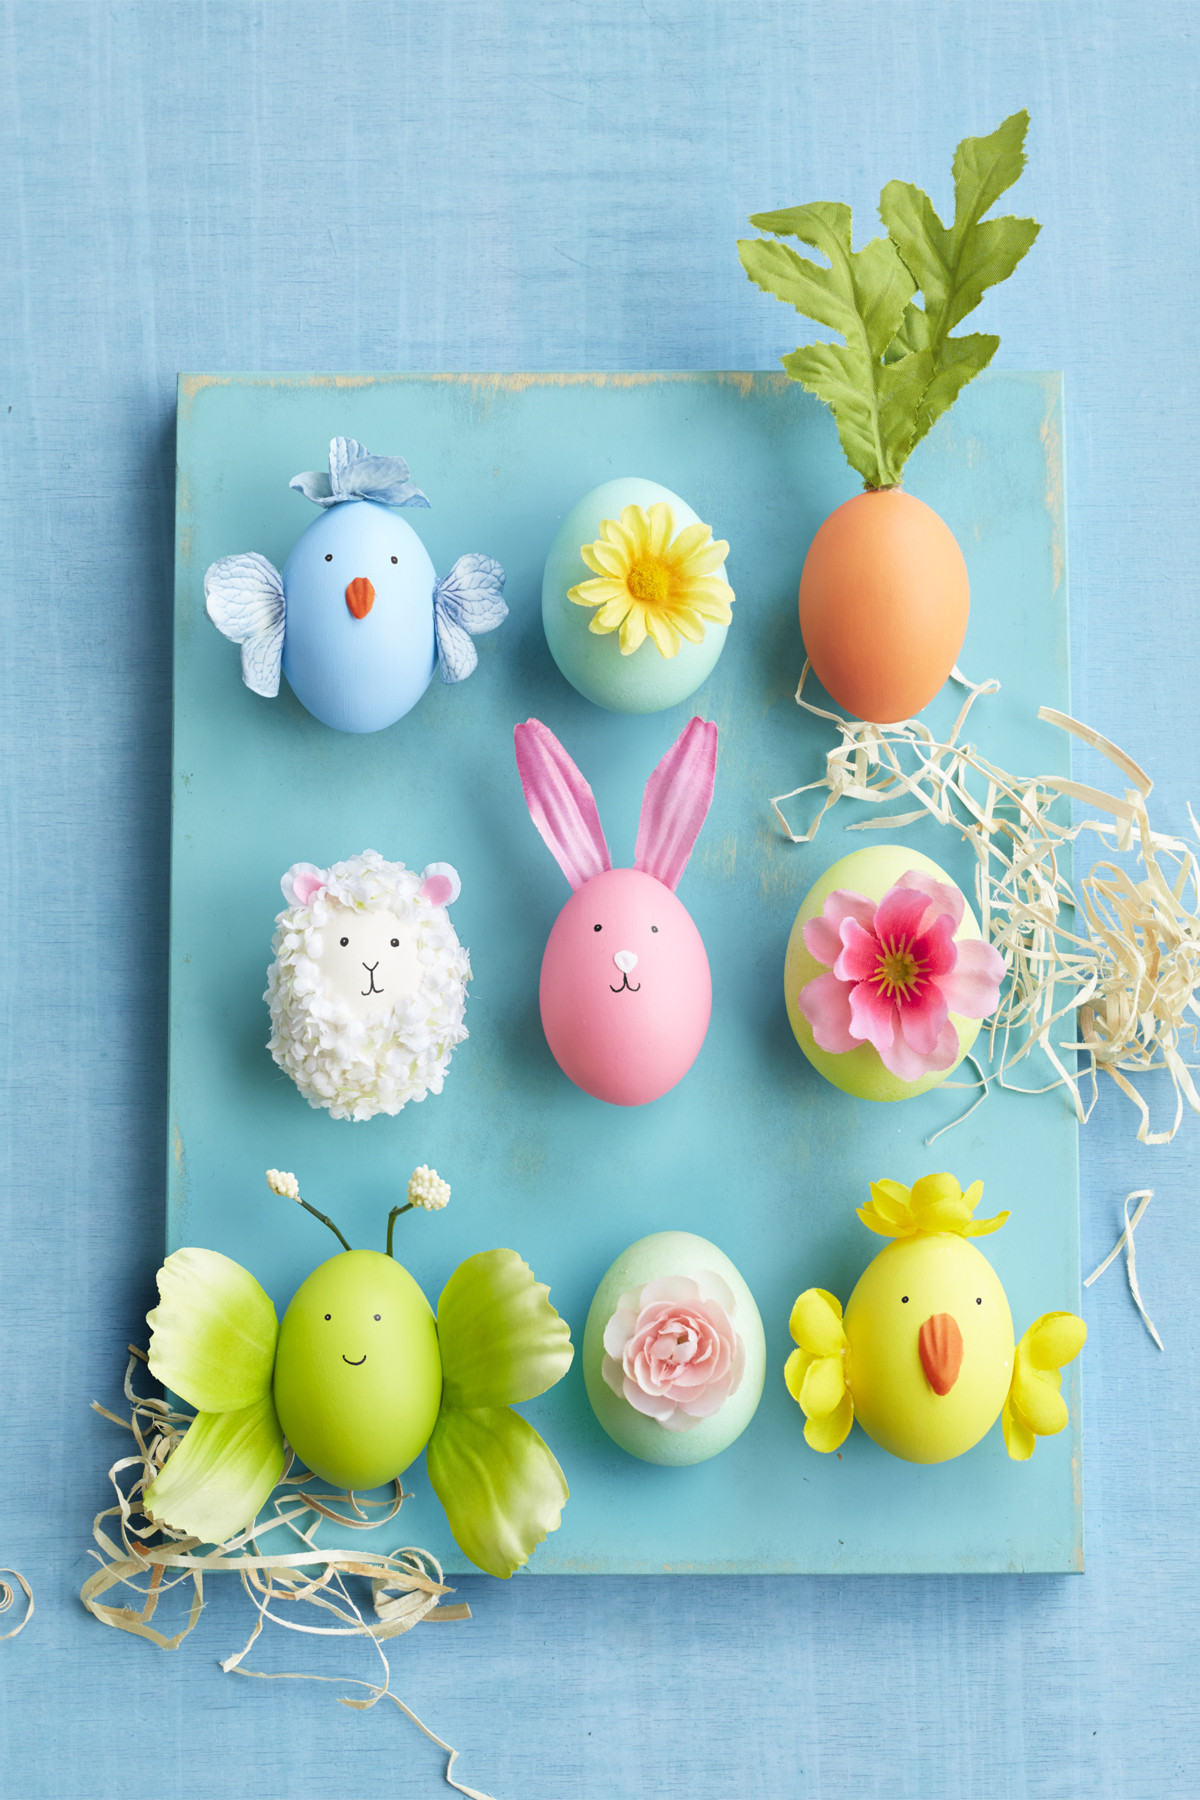 Easter Ideas
 42 Cool Easter Egg Decorating Ideas Creative Designs for